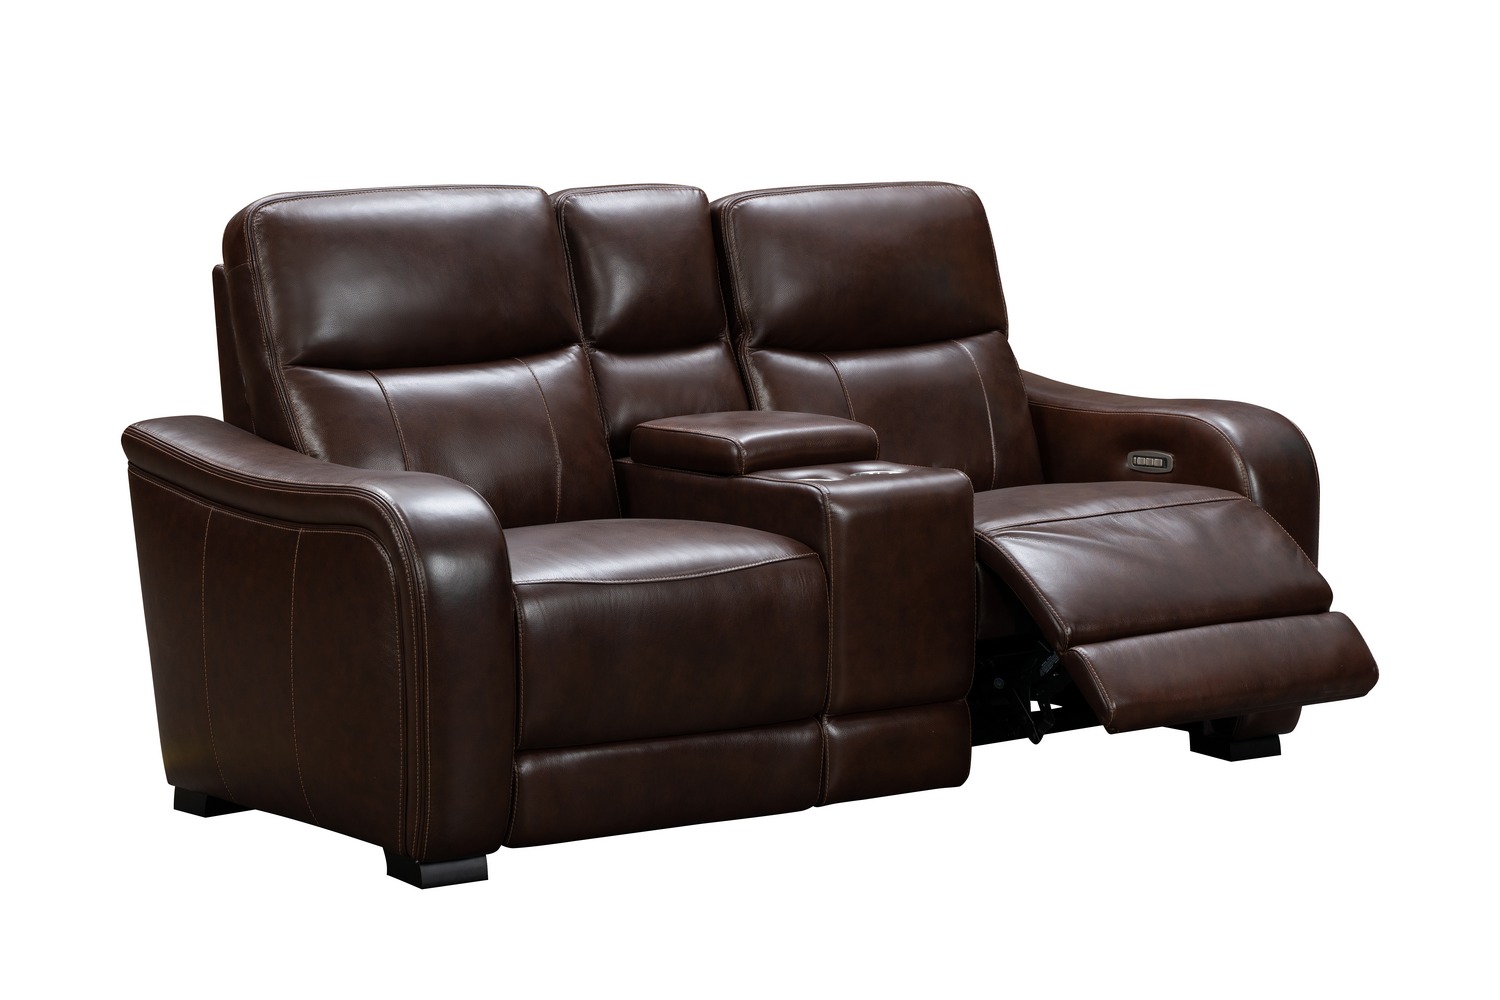 Barcalounger Electra Power Reclining Console Loveseat with Power Head Rests and Power Lumbar - Castleton Rustic Brown/Leather Match